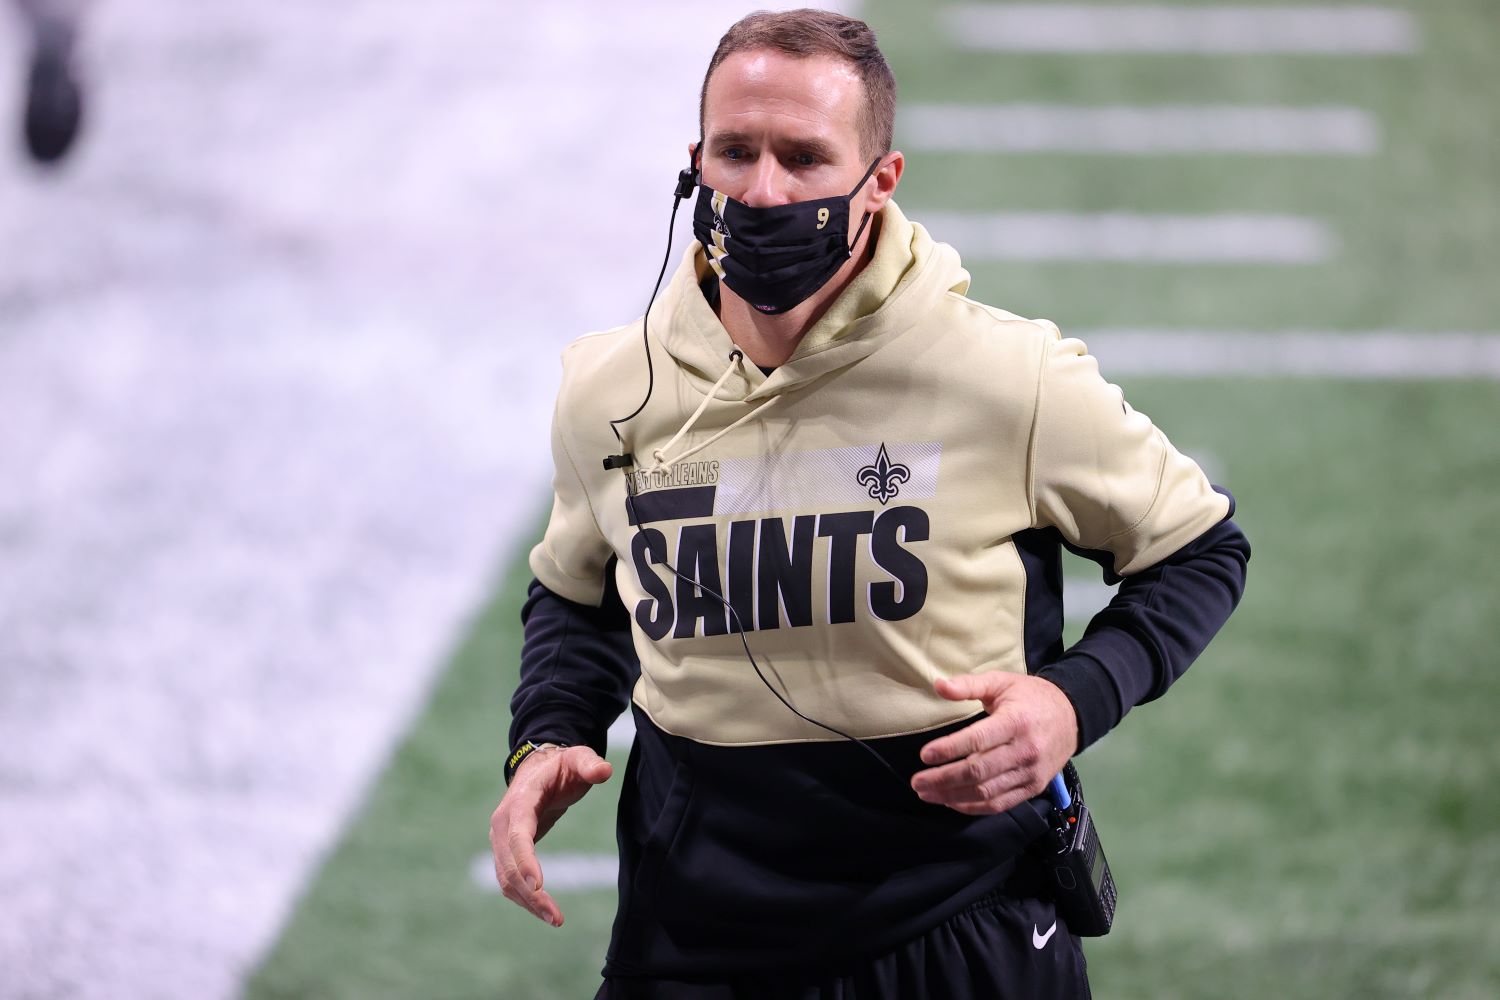 Drew Brees may not be returning to the Saints lineup anytime soon based on Sean Payton's recent comments.